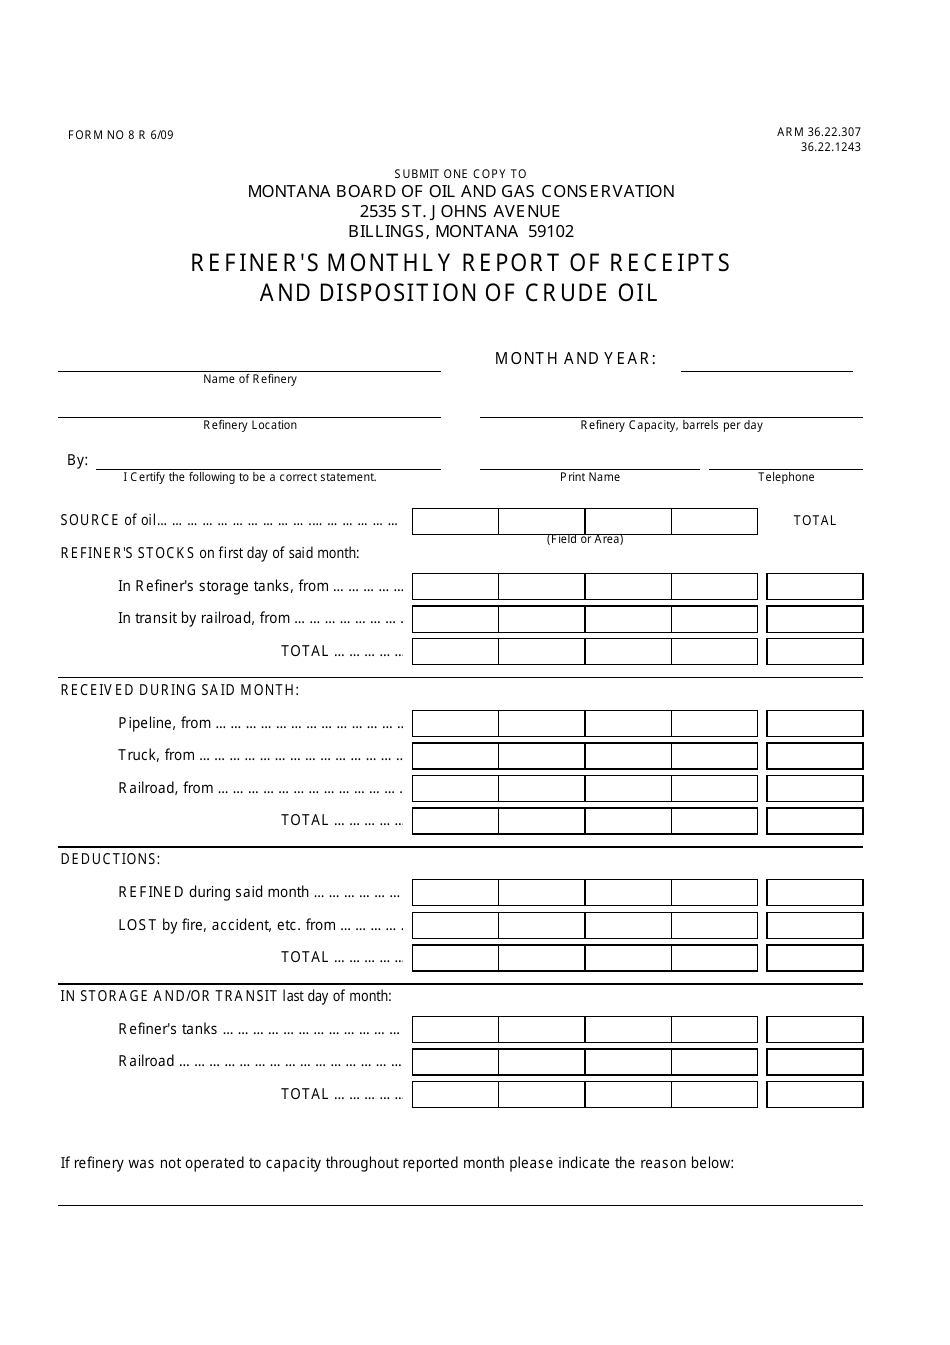 Form 8 Refiners Monthly Report of Receipts and Disposition of Crude Oil - Montana, Page 1